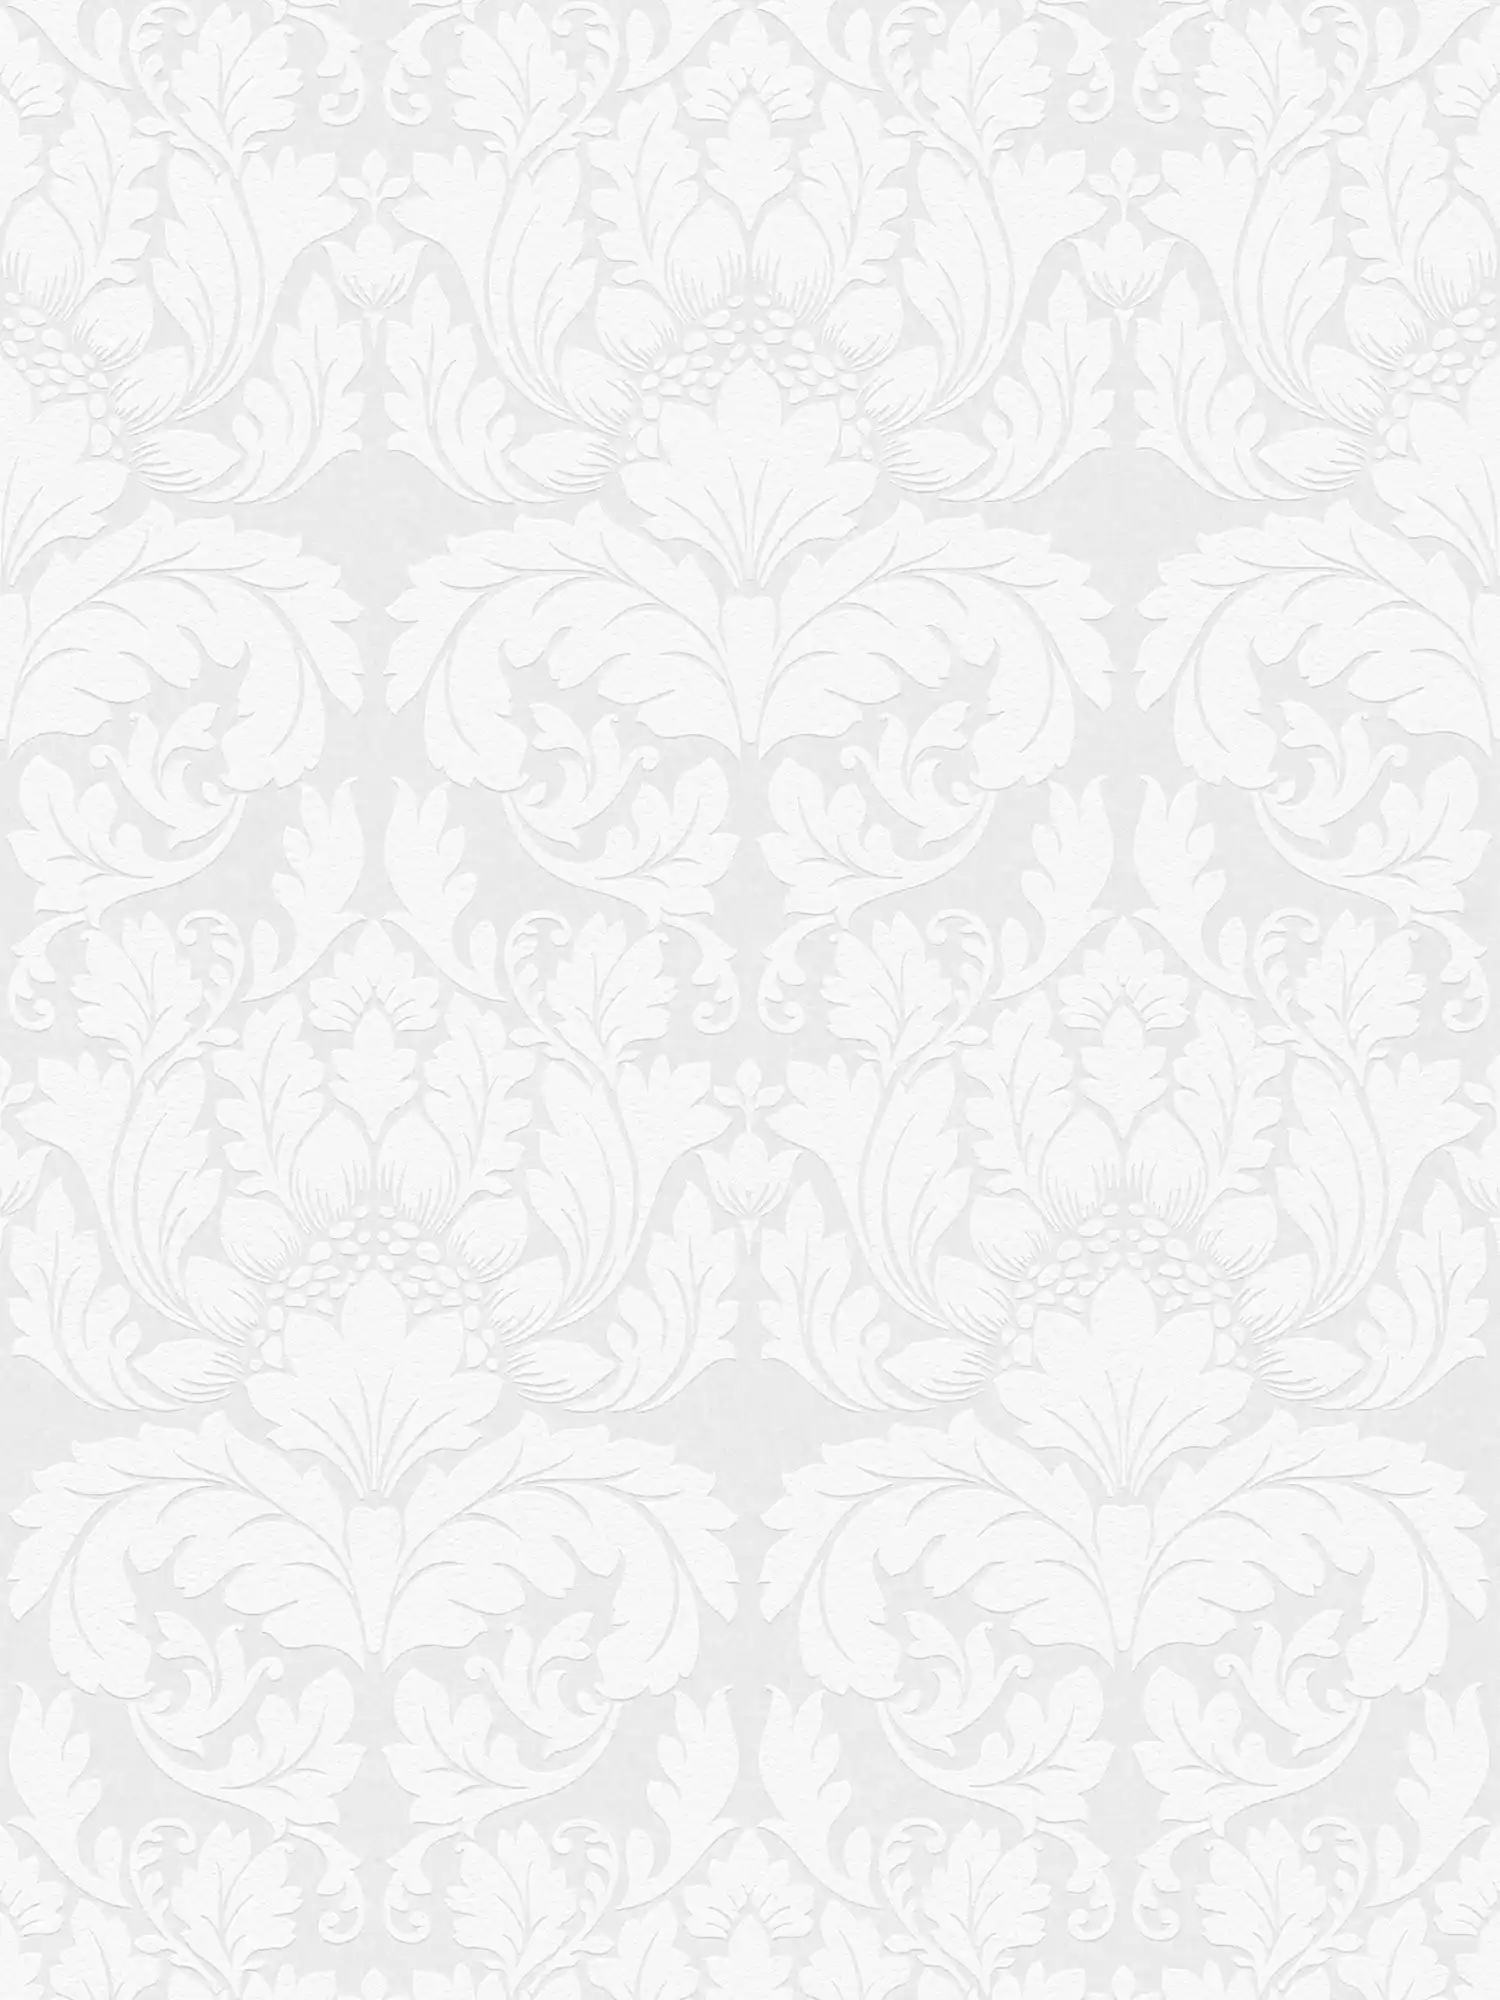 Baroque wallpaper paintable with floral design
